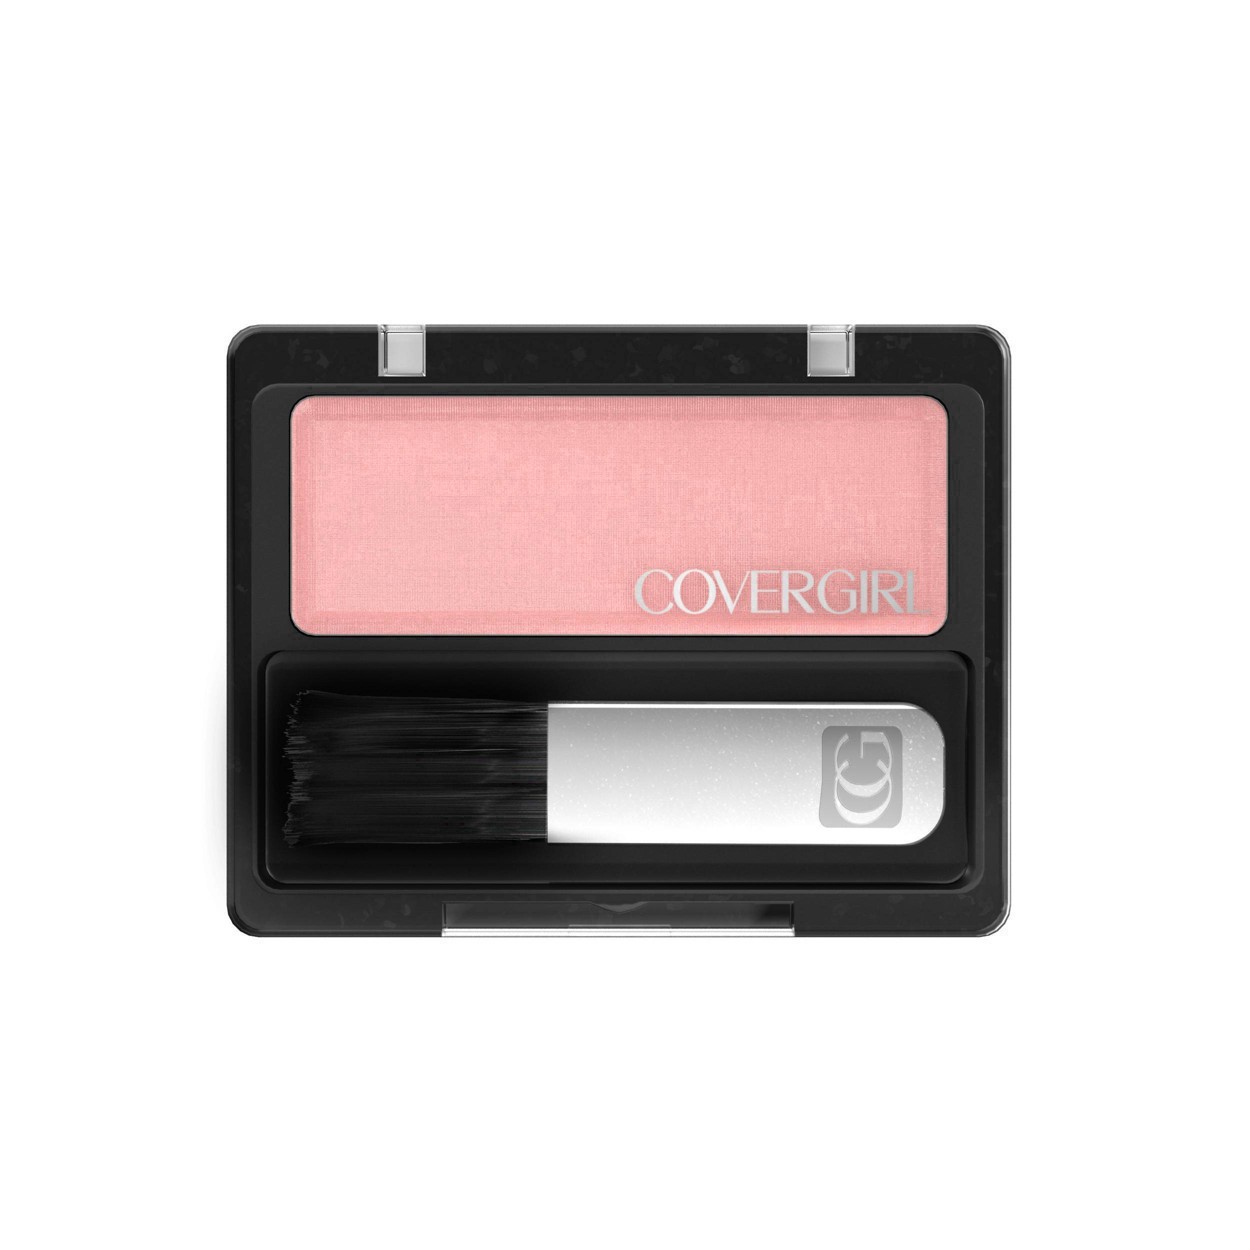 slide 25 of 42, Covergirl COVERGIRL Classic Color Blush Rose Silk, 1 ct